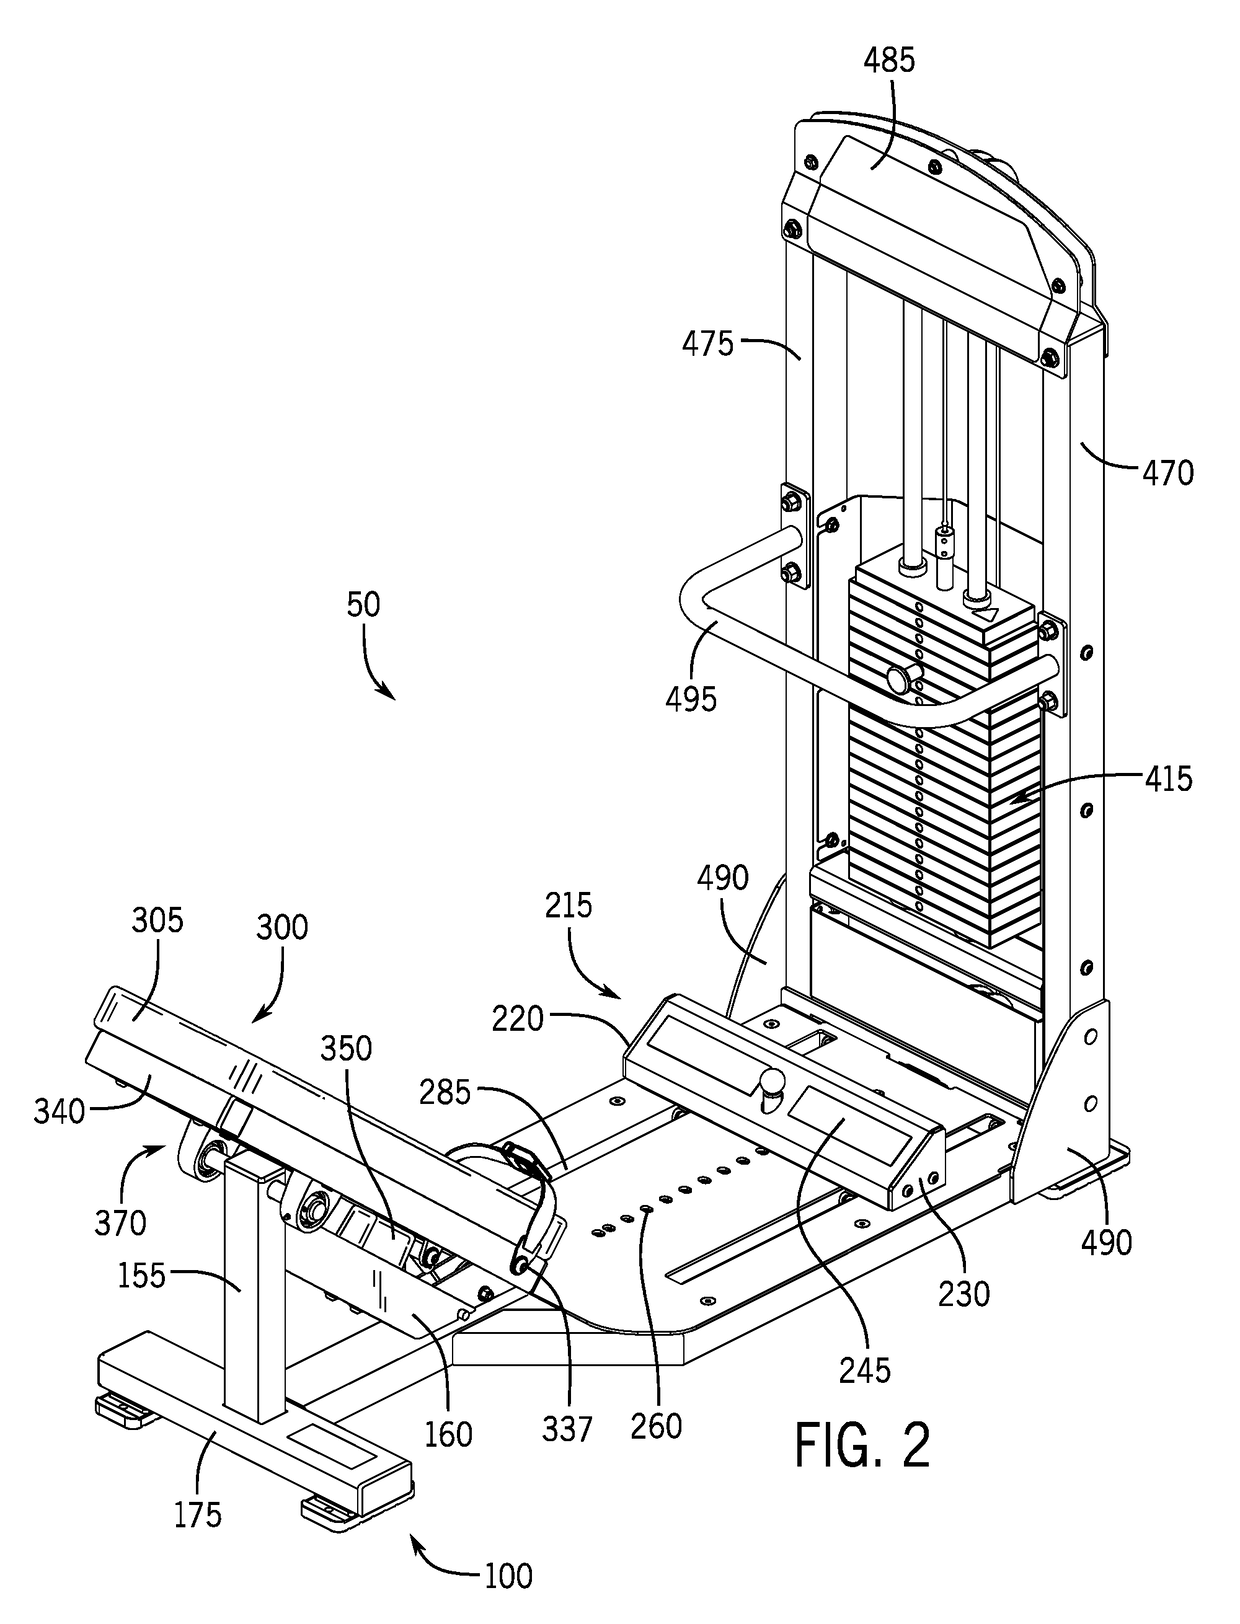 Exercise apparatus for performing a gluteal bridge movement